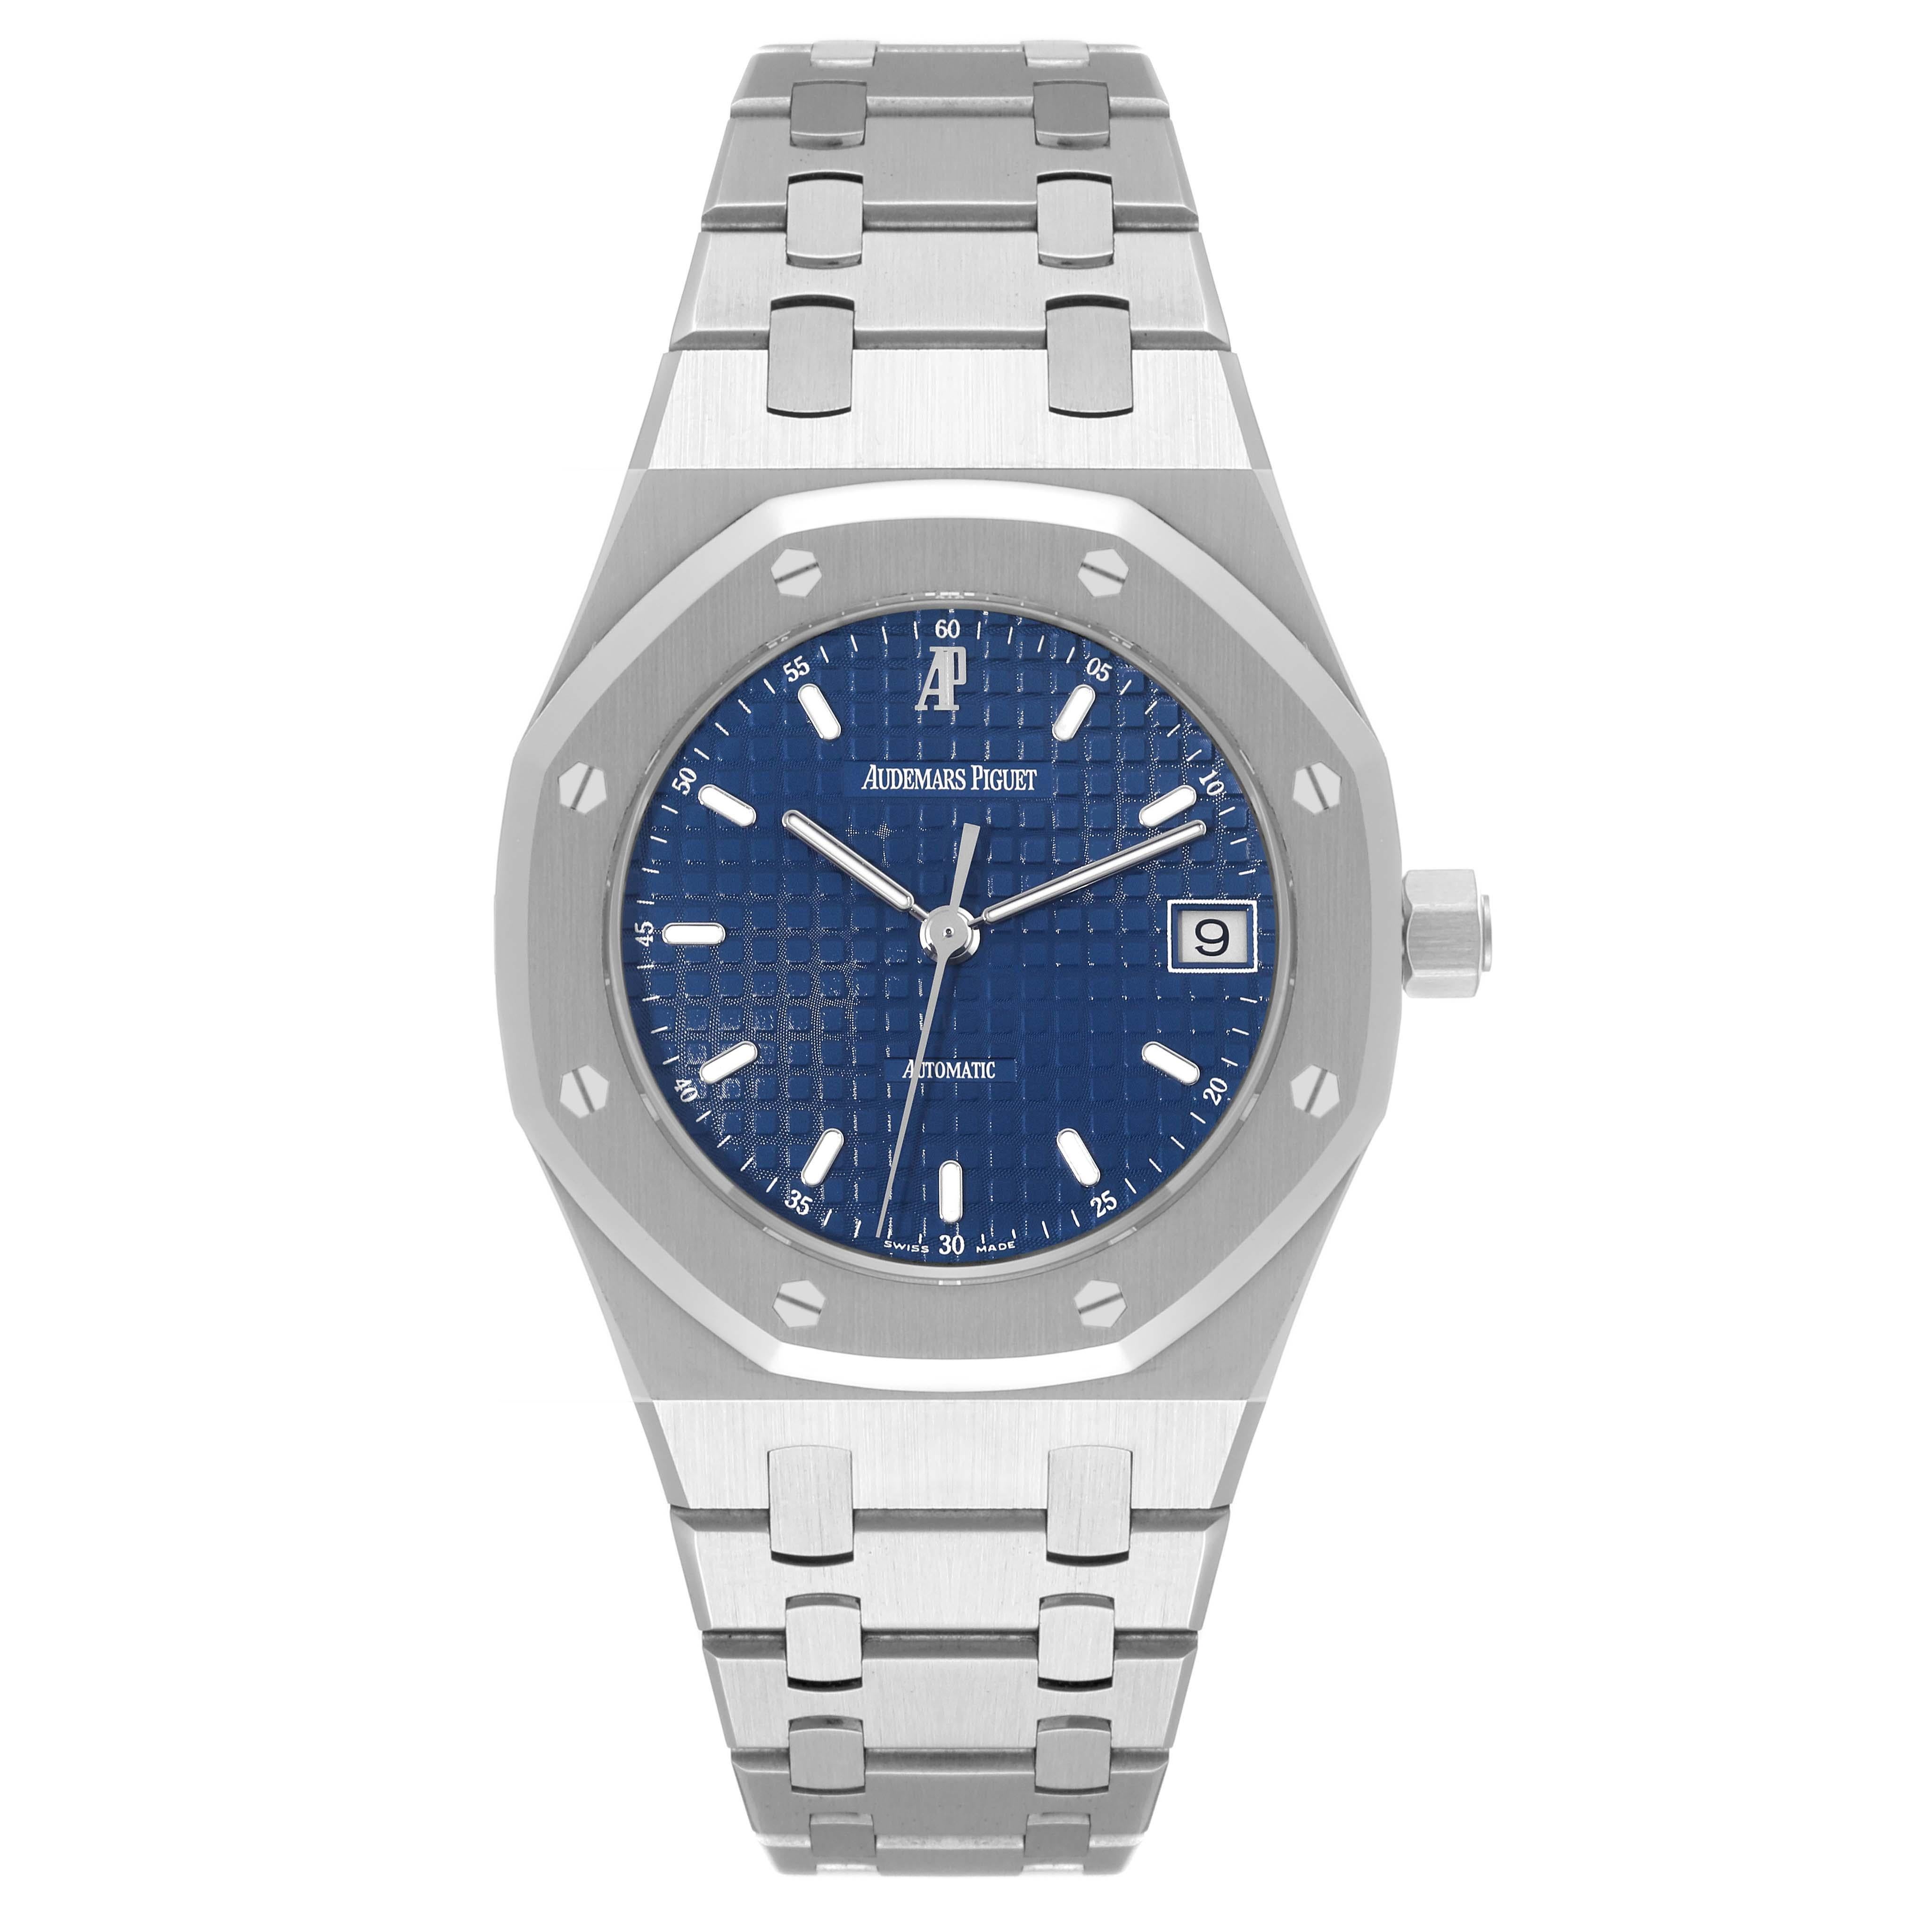 Audemars Piguet Royal Oak Blue Dial Steel Mens Watch 14790ST Papers. Automatic self-winding movement. Stainless steel case 36.0 mm in diameter. Stainless steel bezel punctuated with 8 signature screws. Stainless steel case 36.0 mm in diameter. Blue